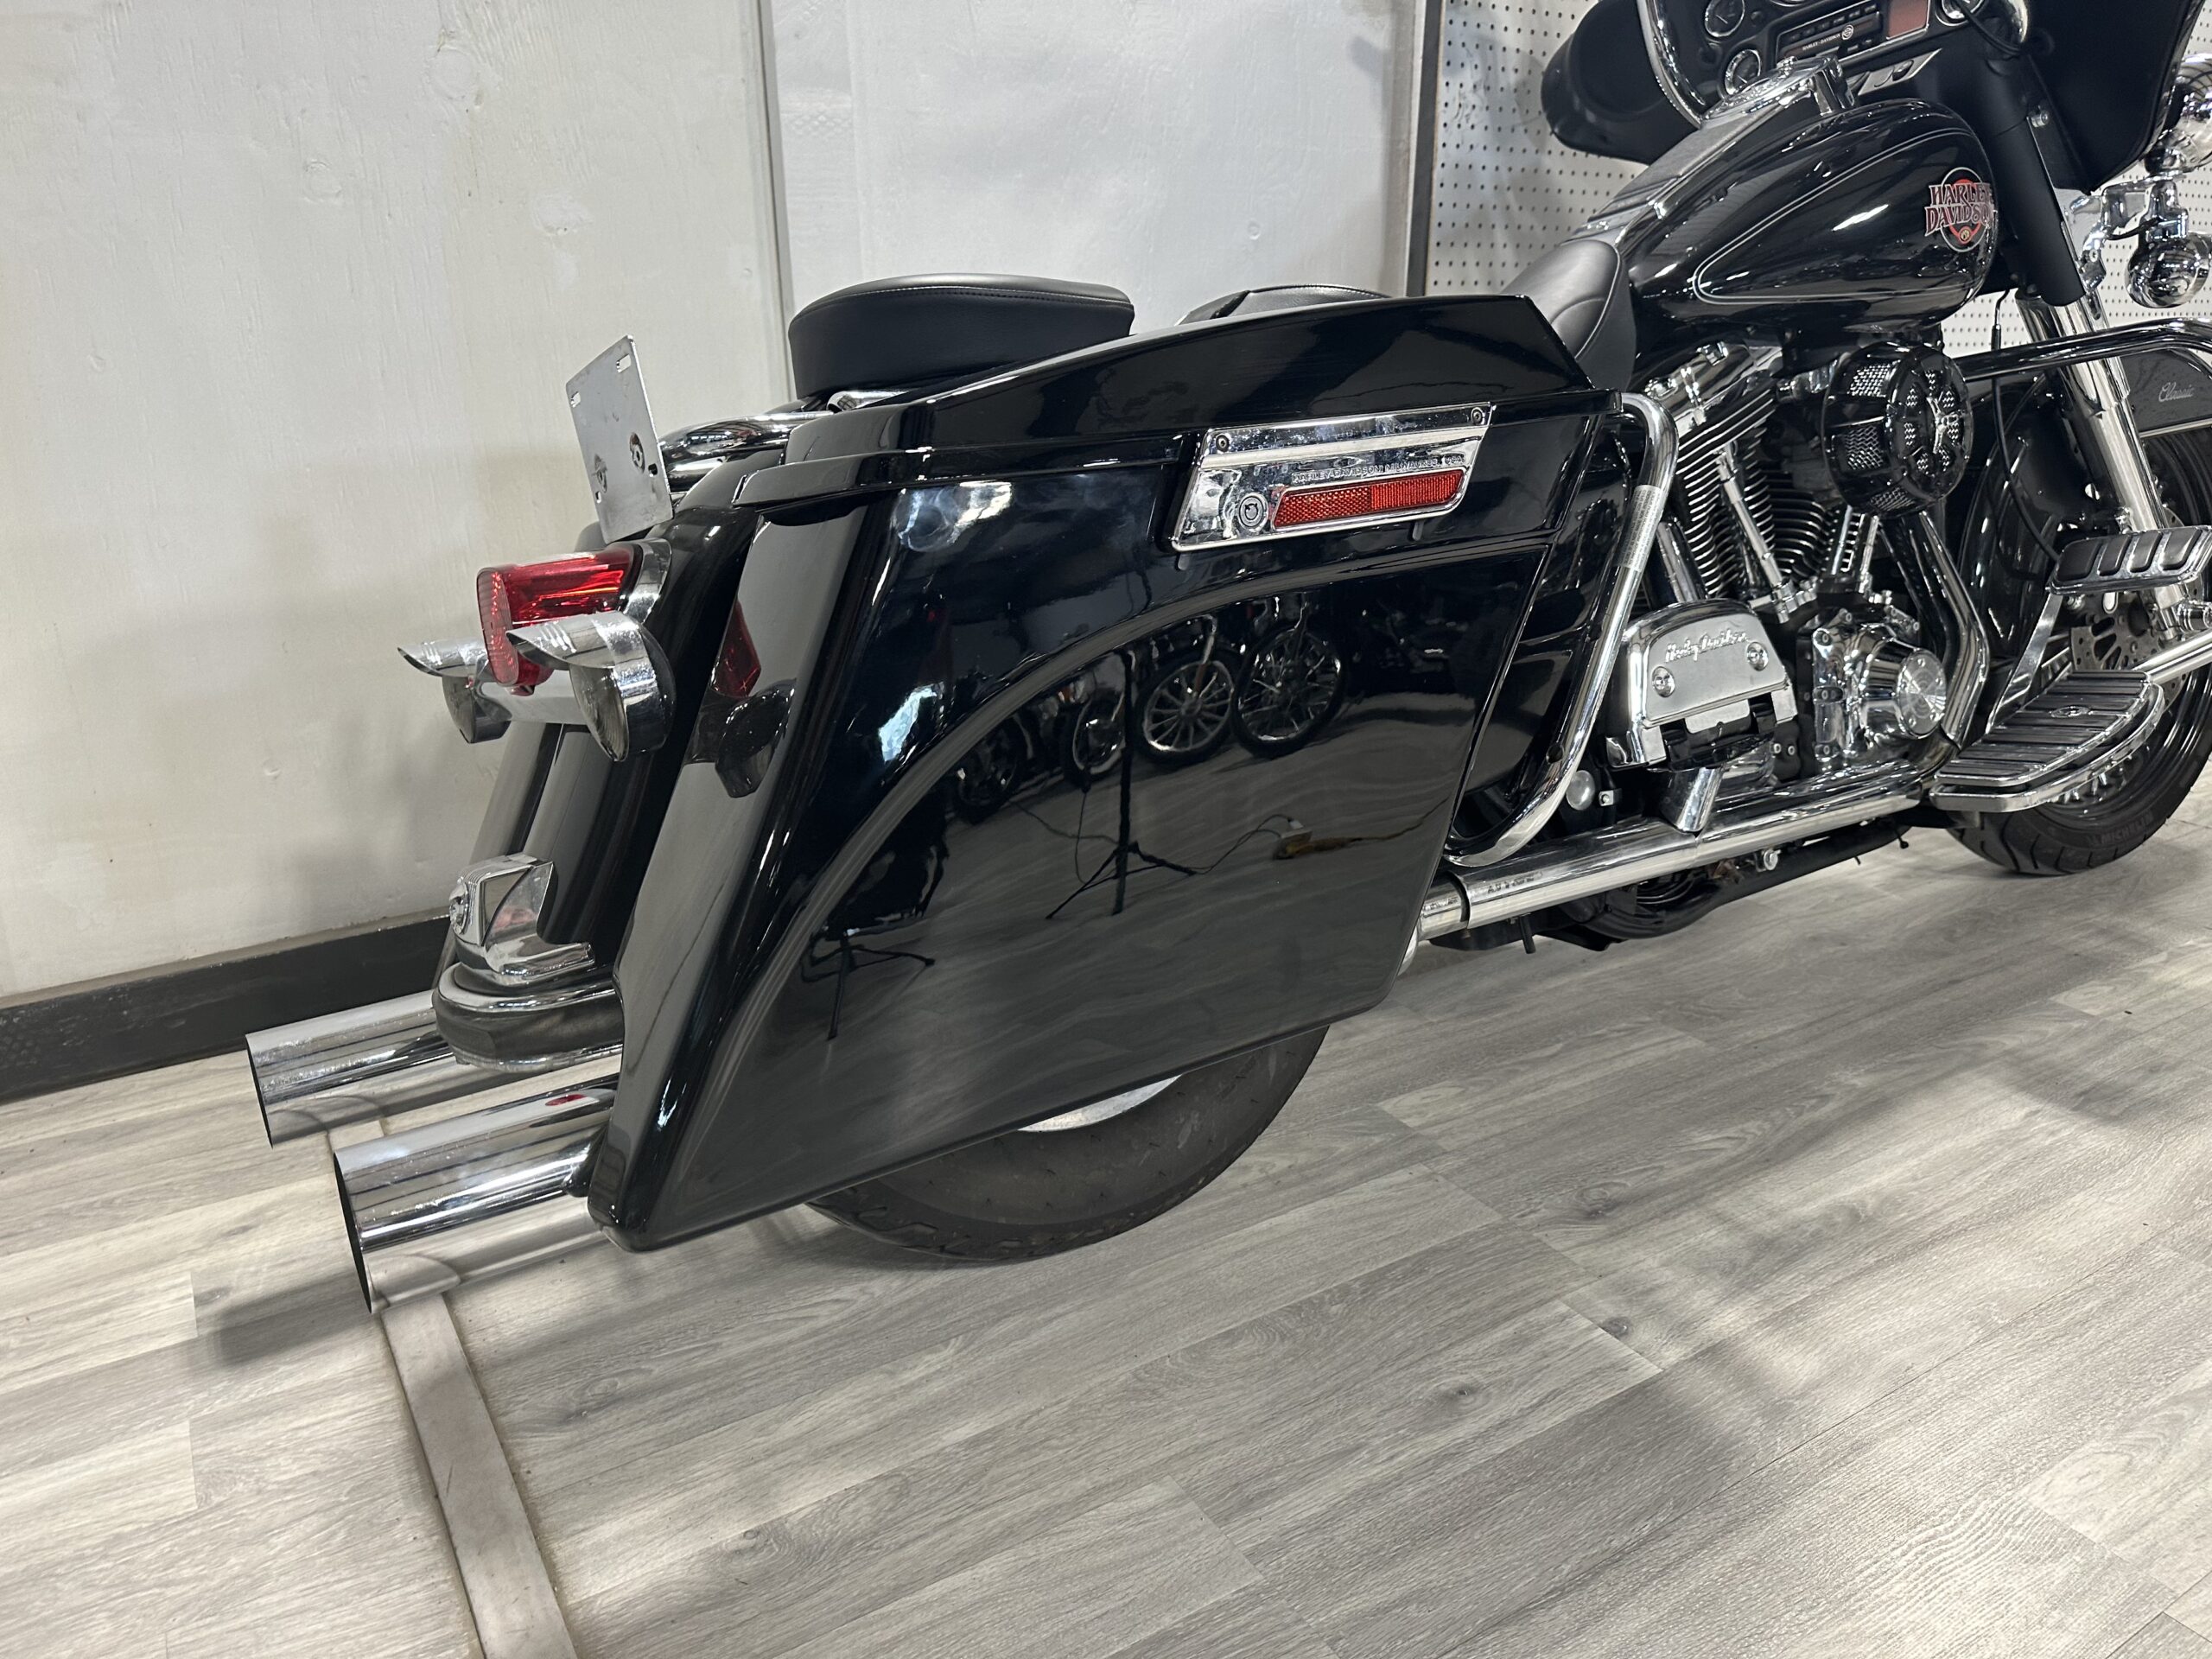 HARLEY DAVIDSON ELECTRA GLIDE CLASSIC FOR SALE ONTARIO